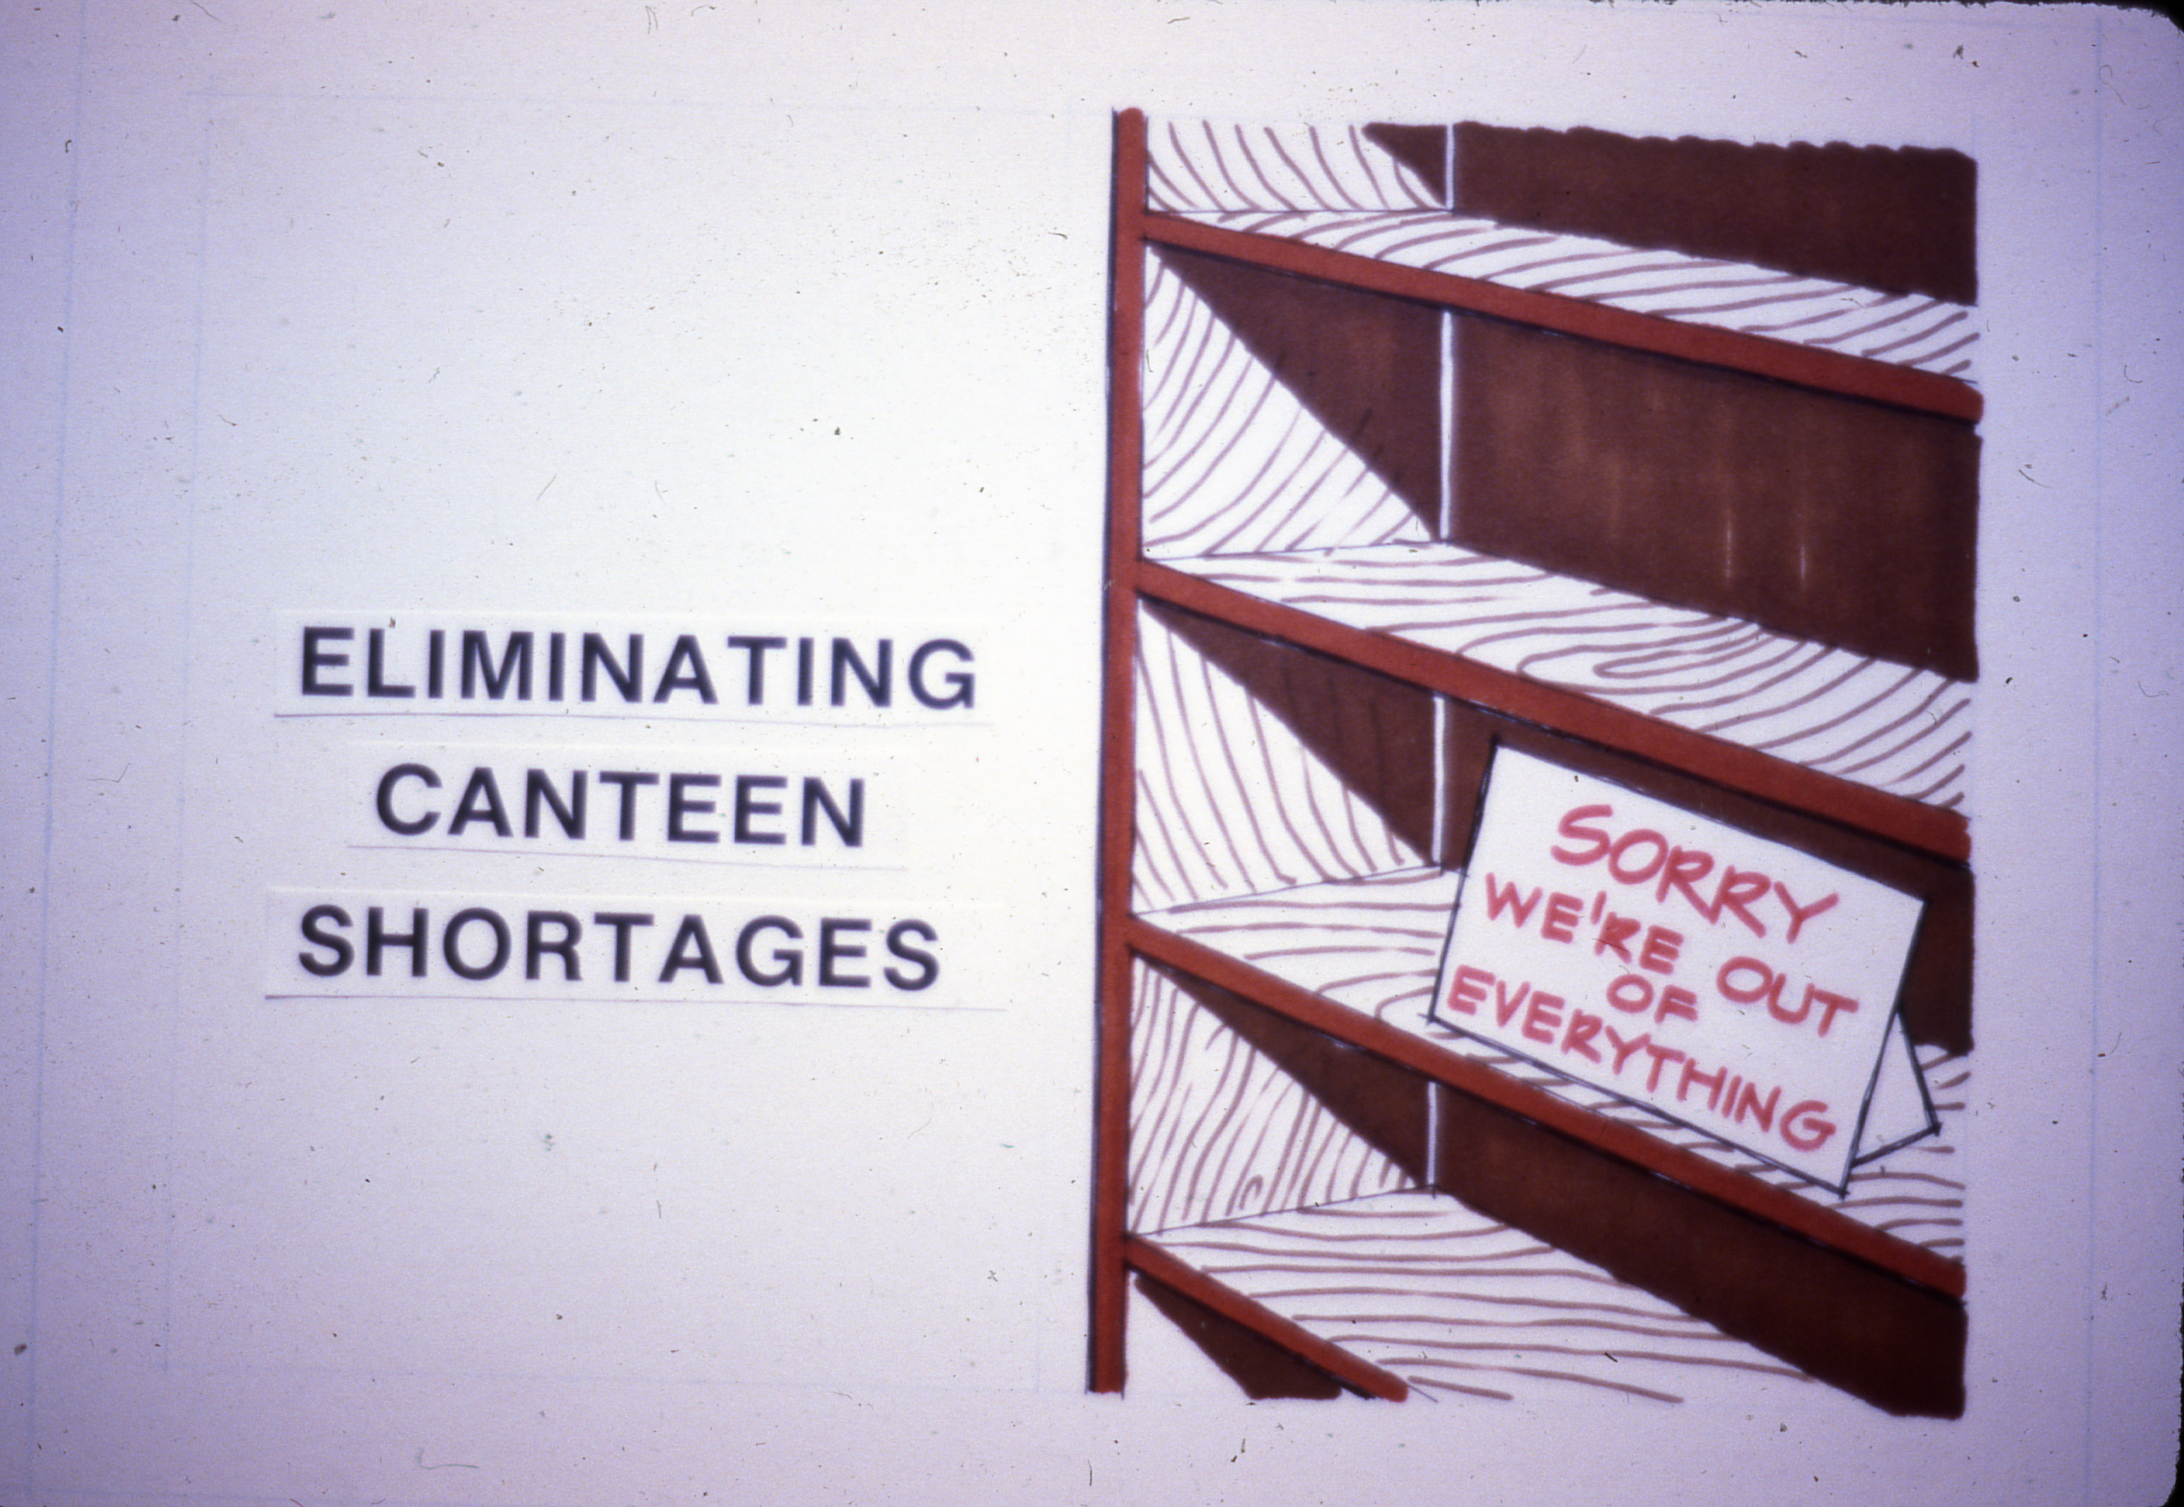 Slide 14: Another image built from construction paper, on the left side this image reads, ELIMINATING CANTEEN SHORTAGES. On the right side are empty shelves a sign saying 'SORRY, WE'RE OUT OF EVERYTHING.